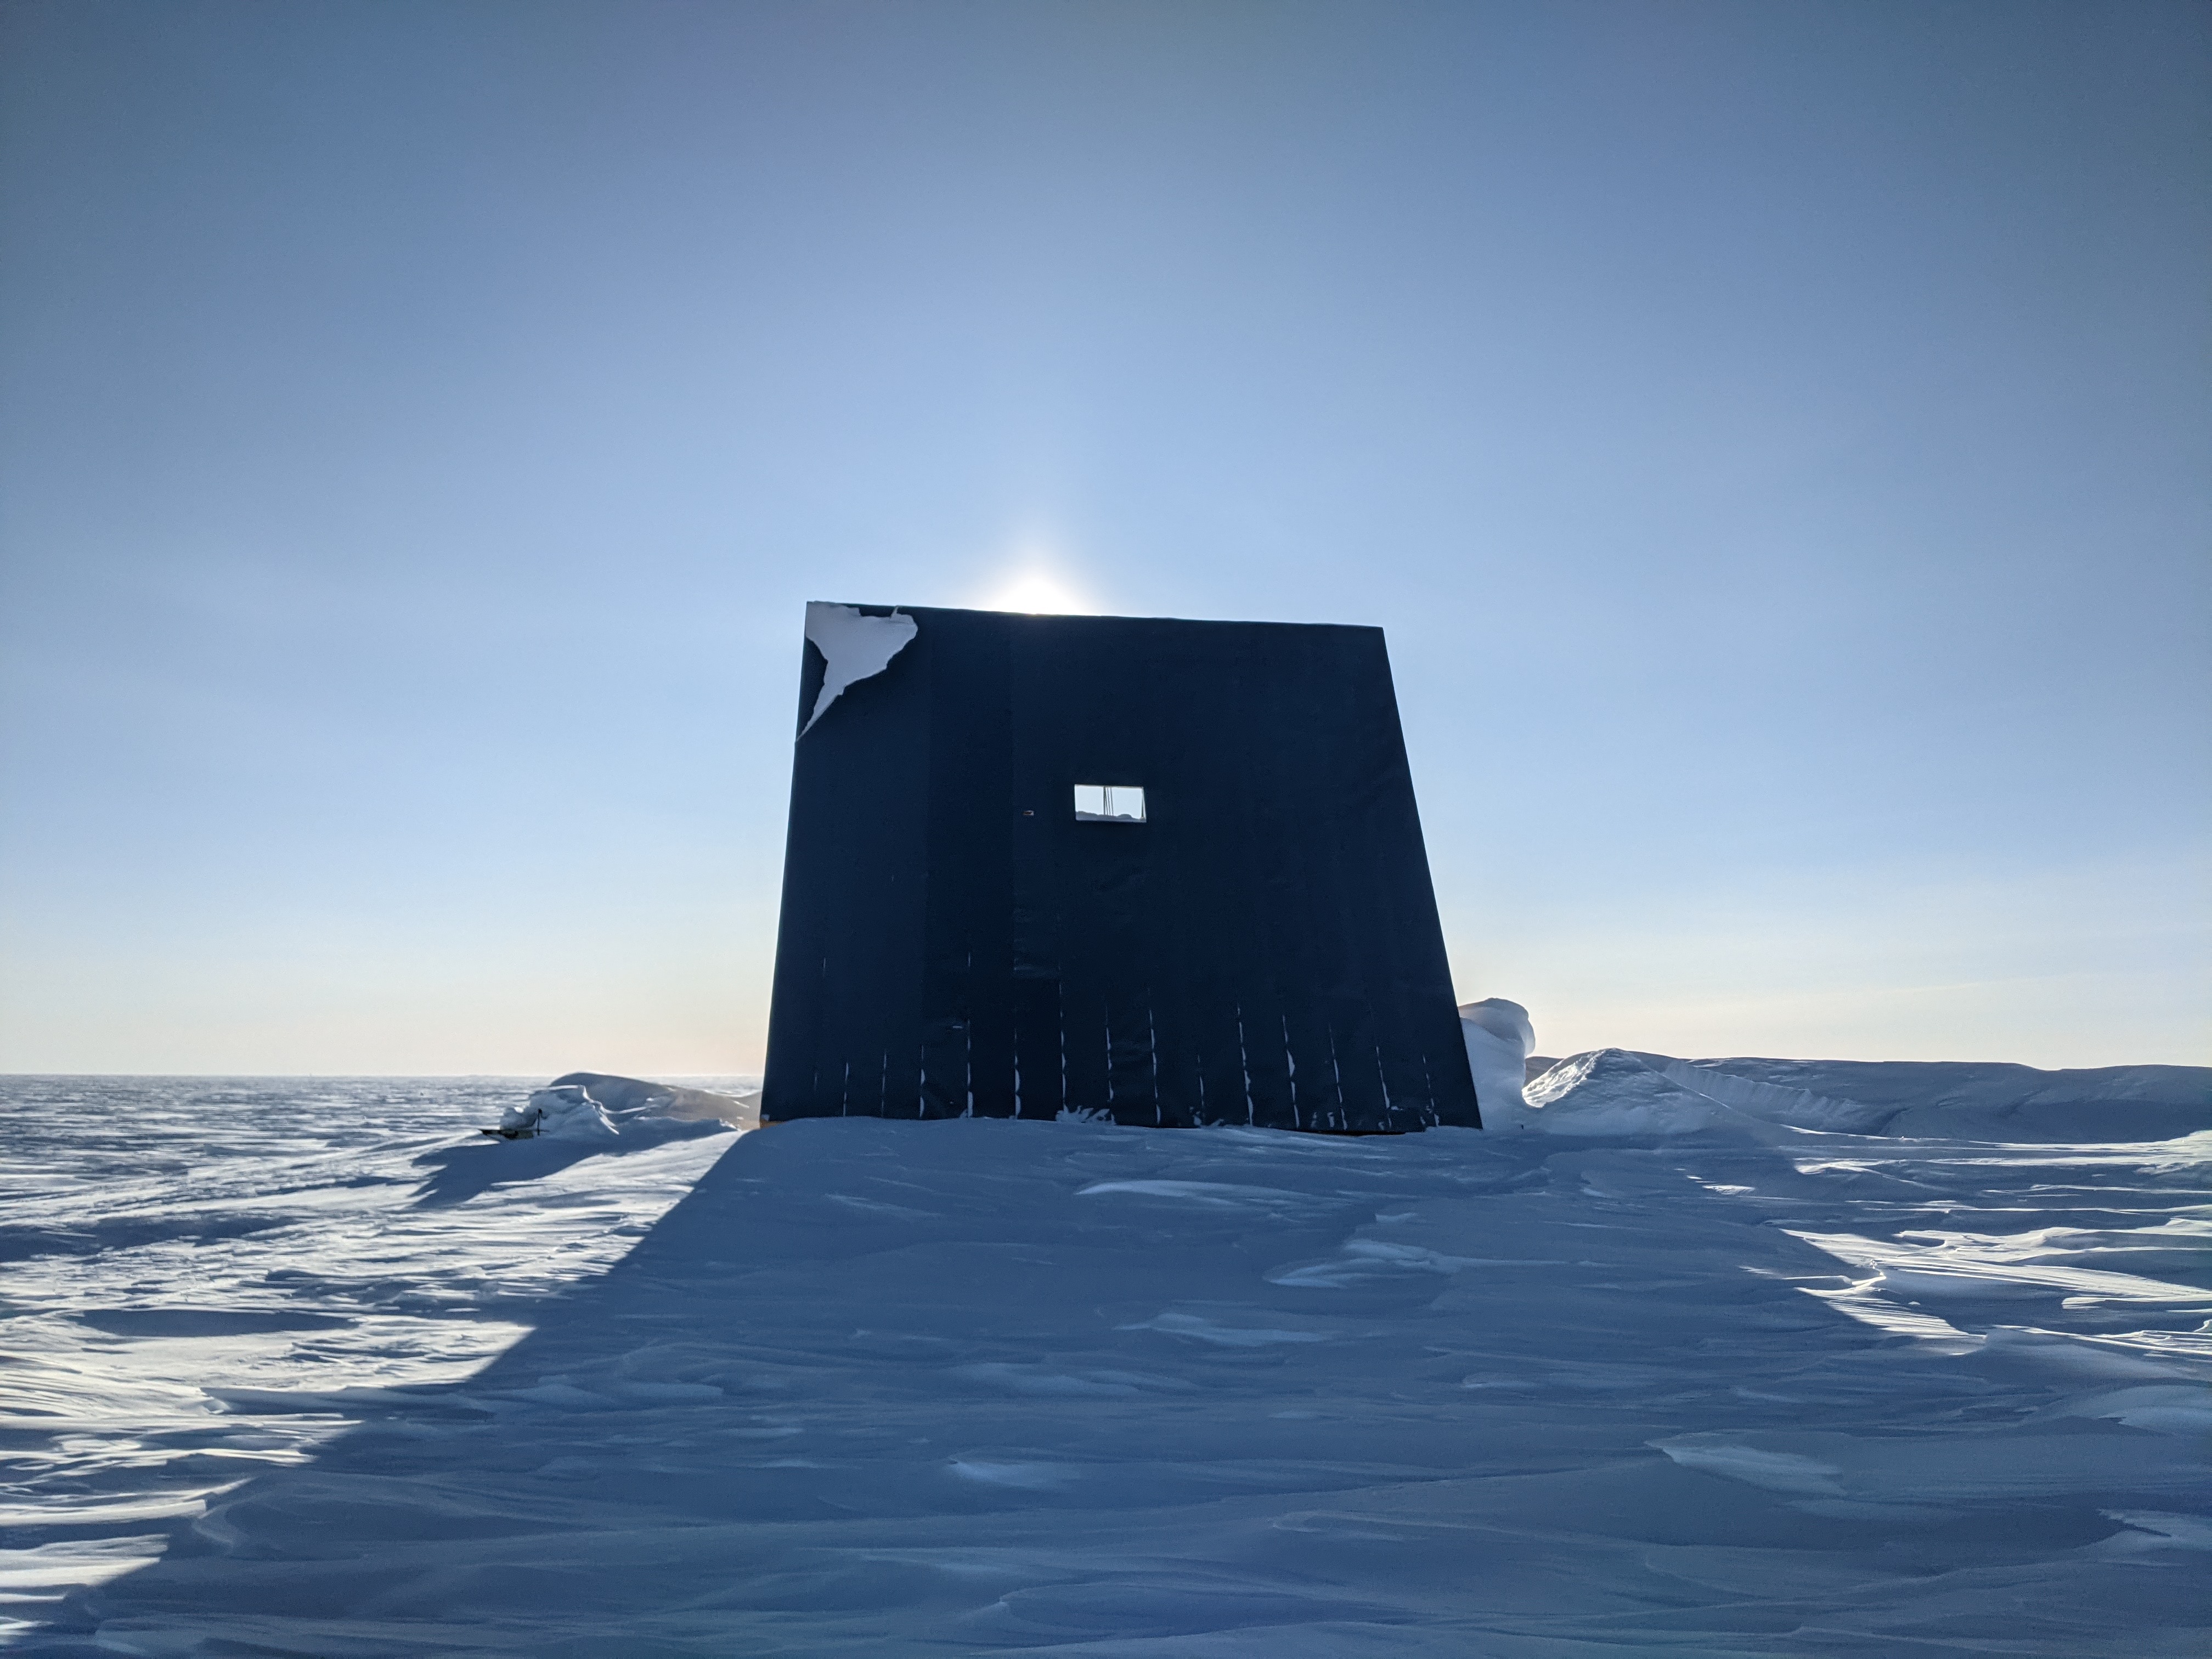 Large monolithic structure outside at the South Pole, with sun shining from behind it.